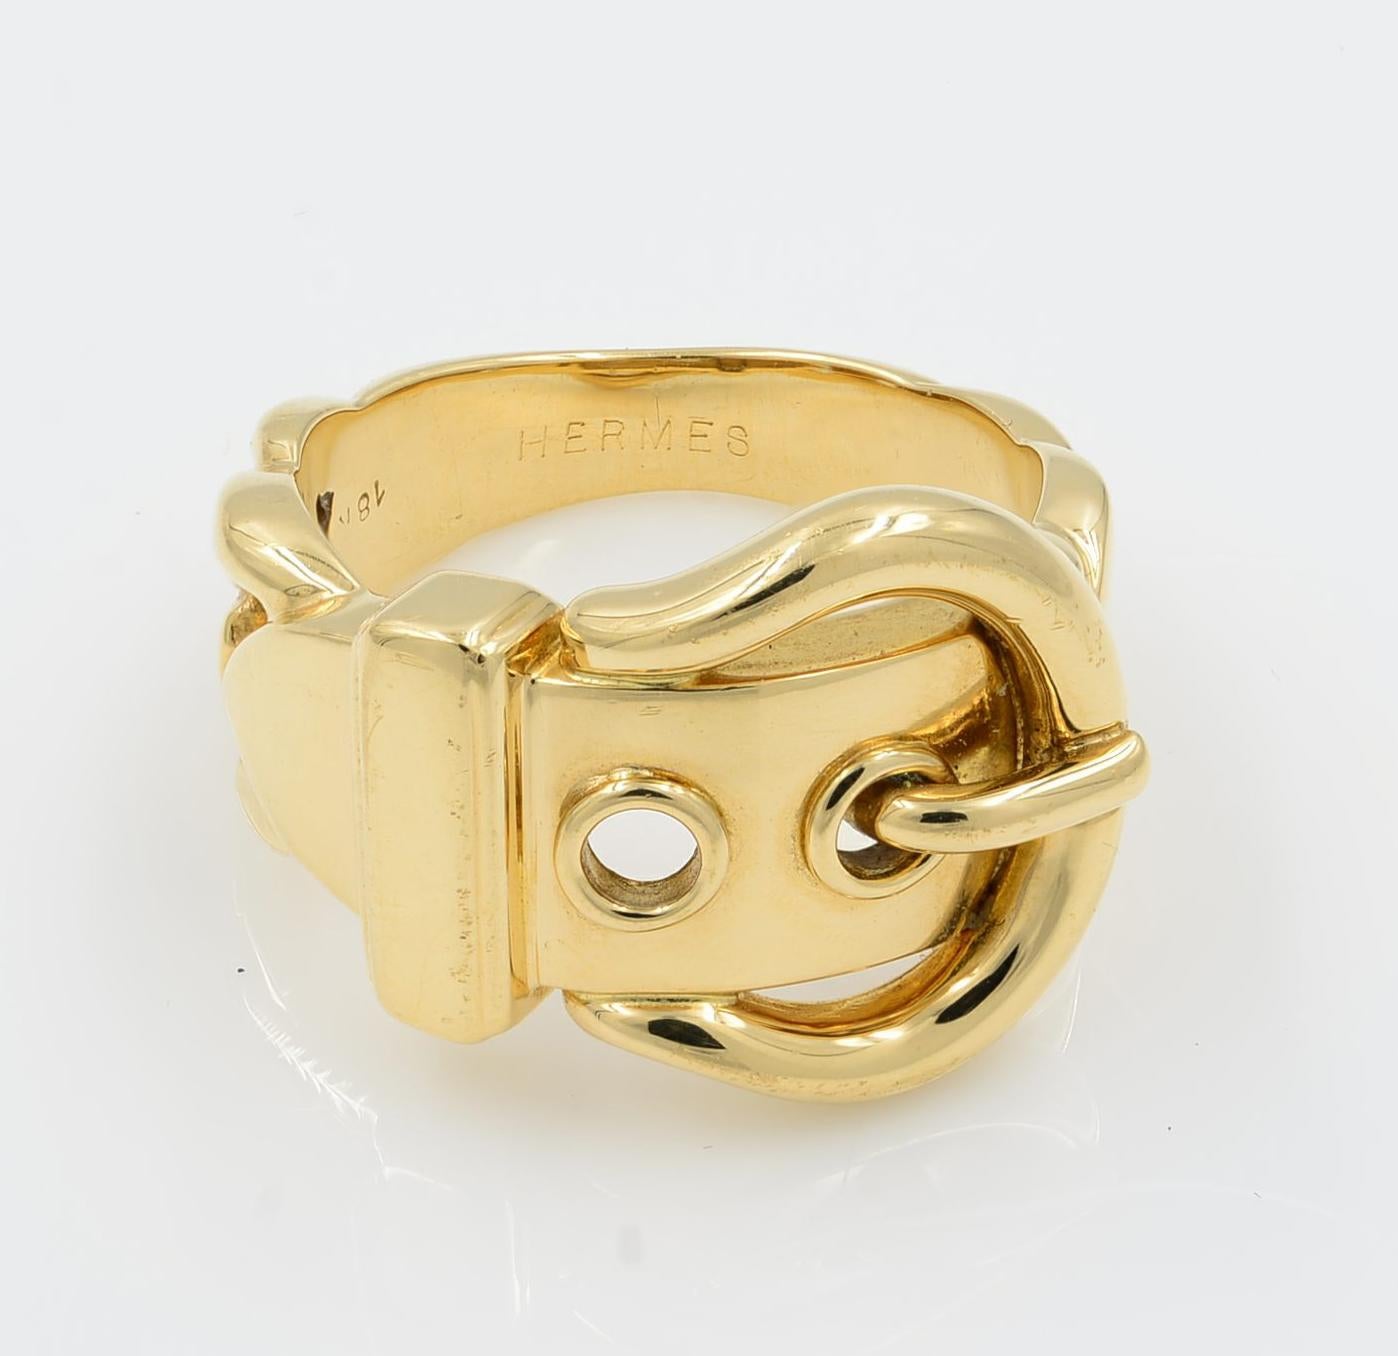 An authentic elegant ring by Hermes, this lovely ring is crafted from 18k yellow gold with a high polished finish. The front of the band features a wide belt and buckle style, tapering off at the two sides are graduated curb link design which tapers